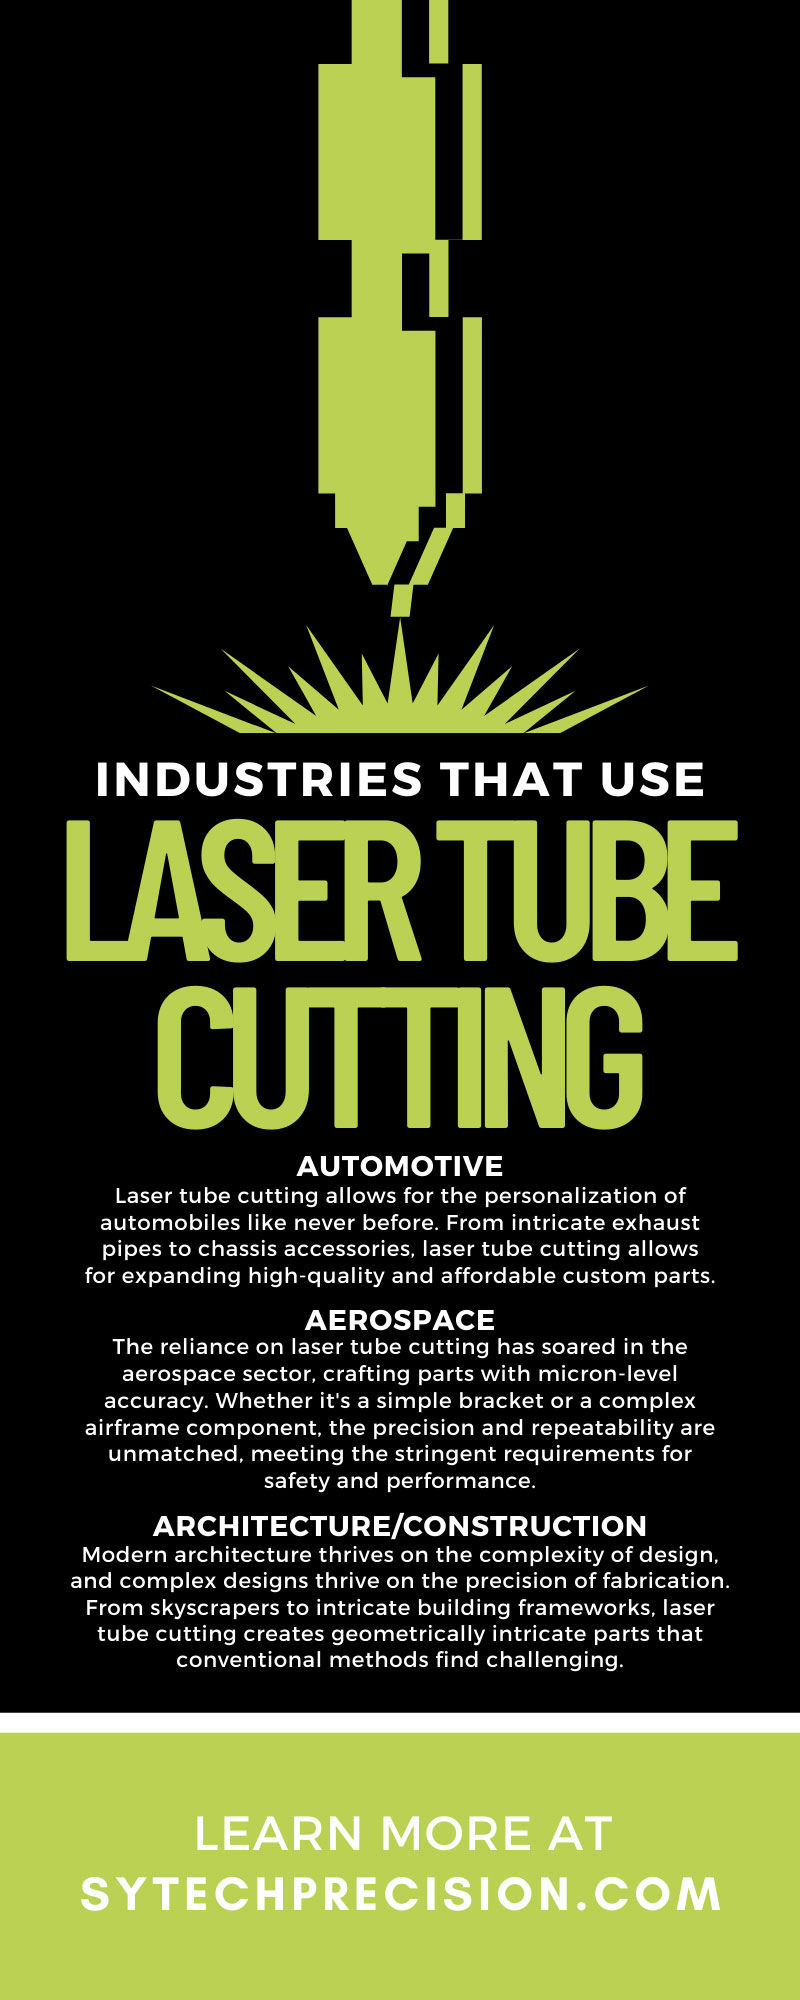 7 Industries That Use Laser Tube Cutting